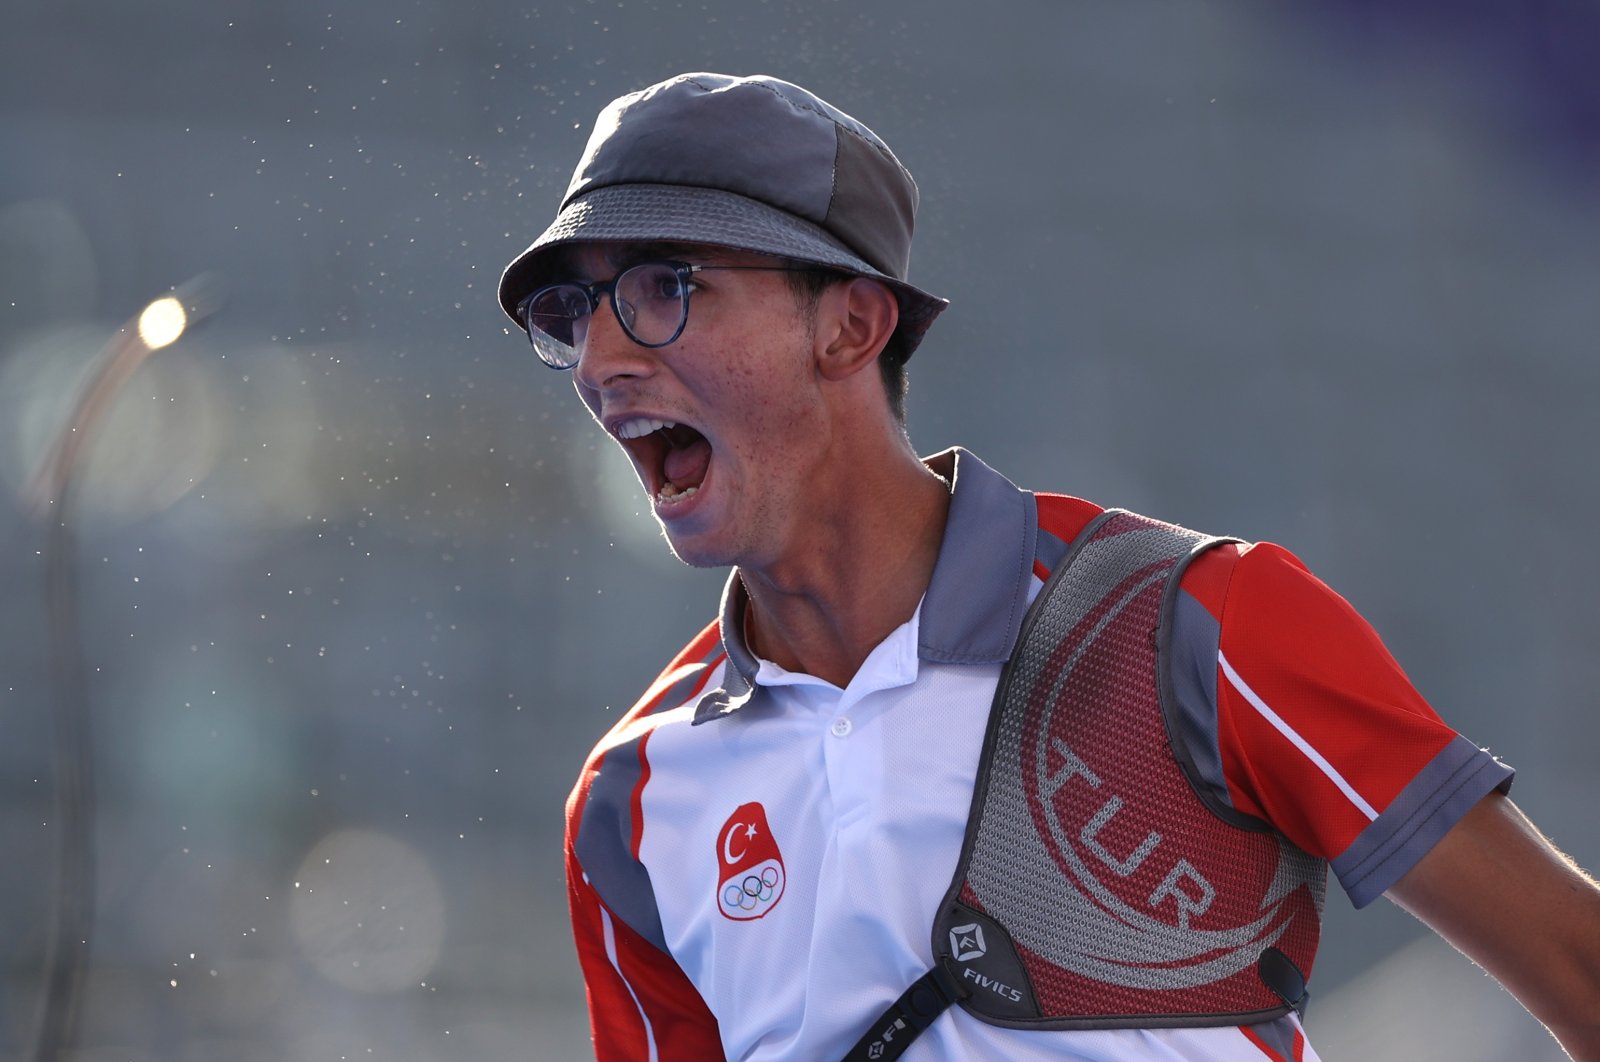 Türkiye&#039;s Mete Gazoz celebrates victory in the archery Men&#039;s Individual gold medal match against Mauro Nespoli of Team Italy on day eight of the Tokyo 2020 Olympic Games at Yumenoshima Park Archery Field, Tokyo, Japan, July 31, 2021. (Getty Images Photo)